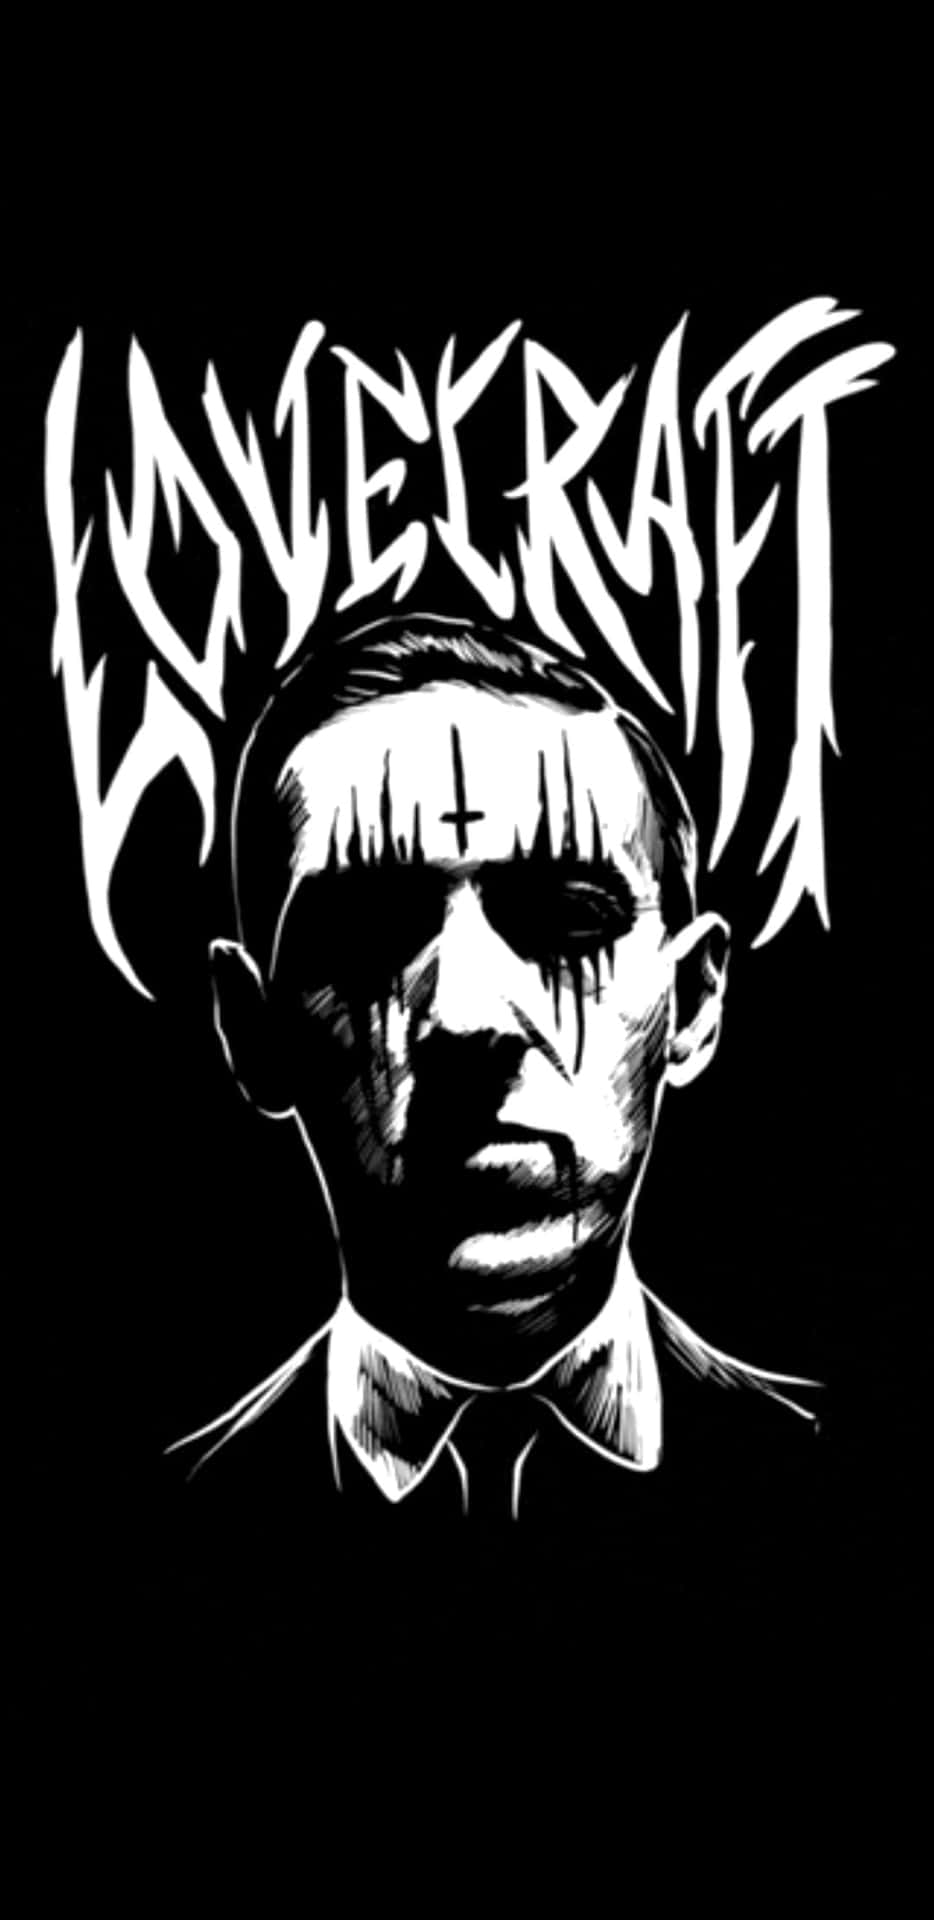 Lovecraft's "The Call of Cthulhu"